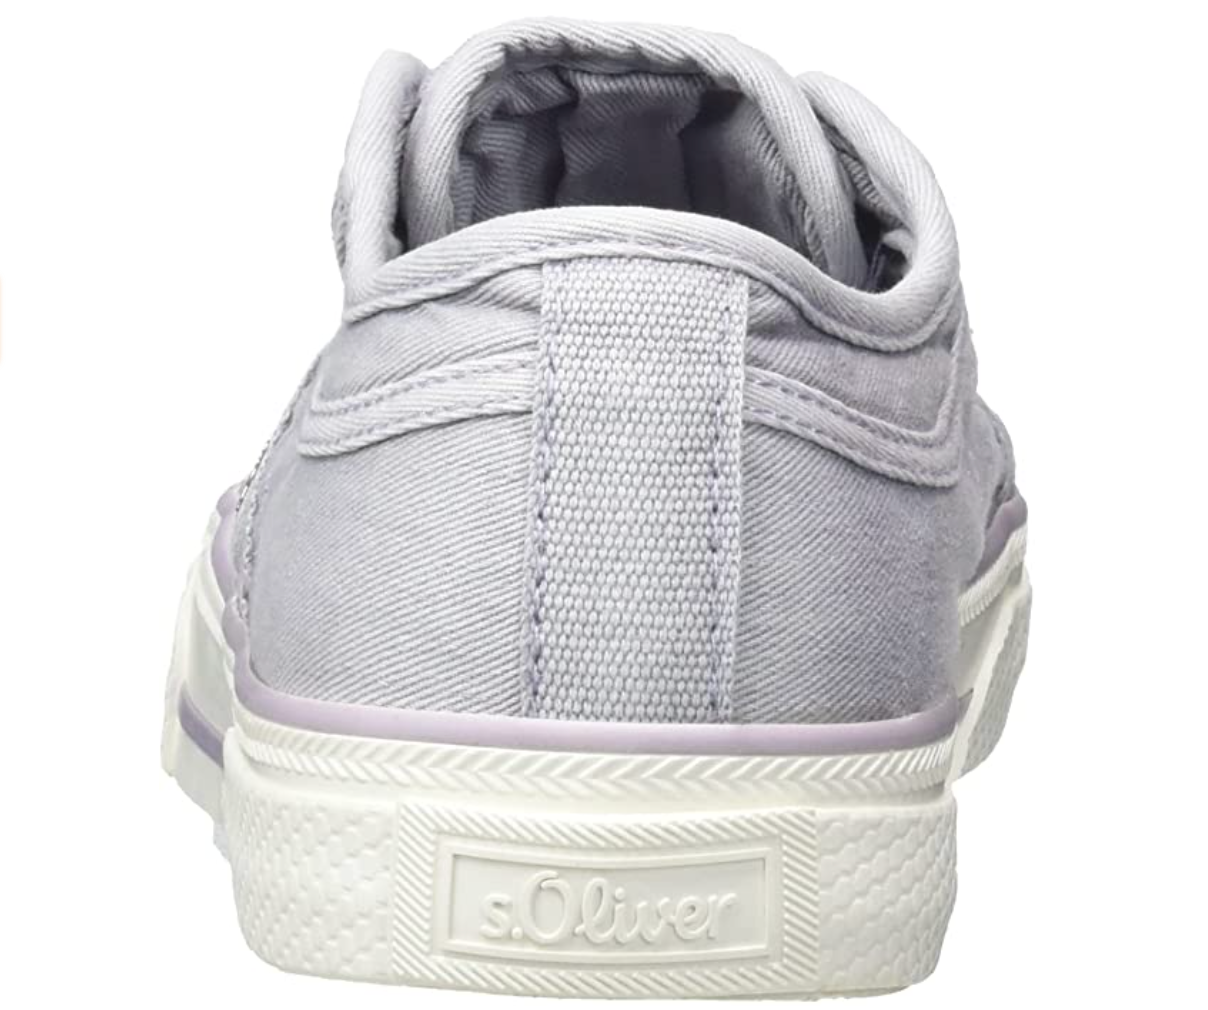 S.Oliver Womens Fashion Slip On Trainer - Lilac - The Foot Factory